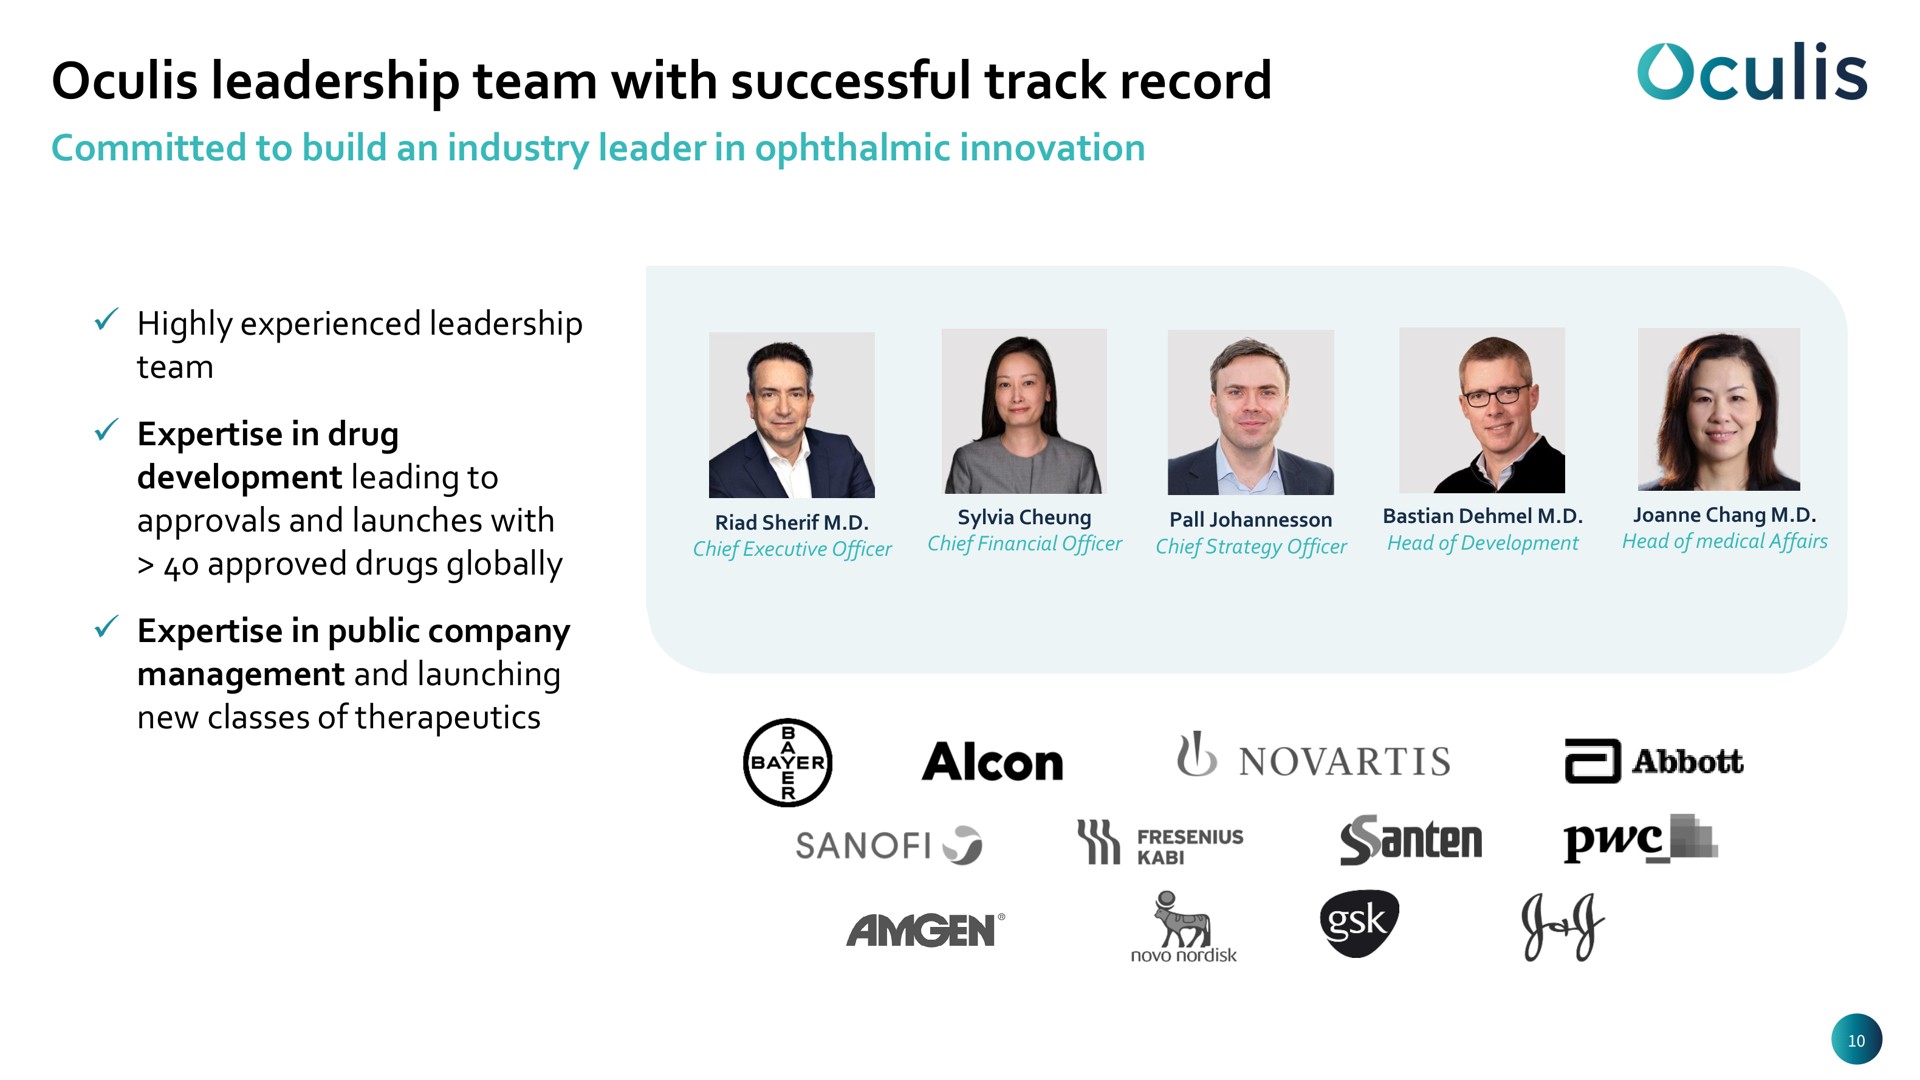 leadership team with successful track record is | Oculis